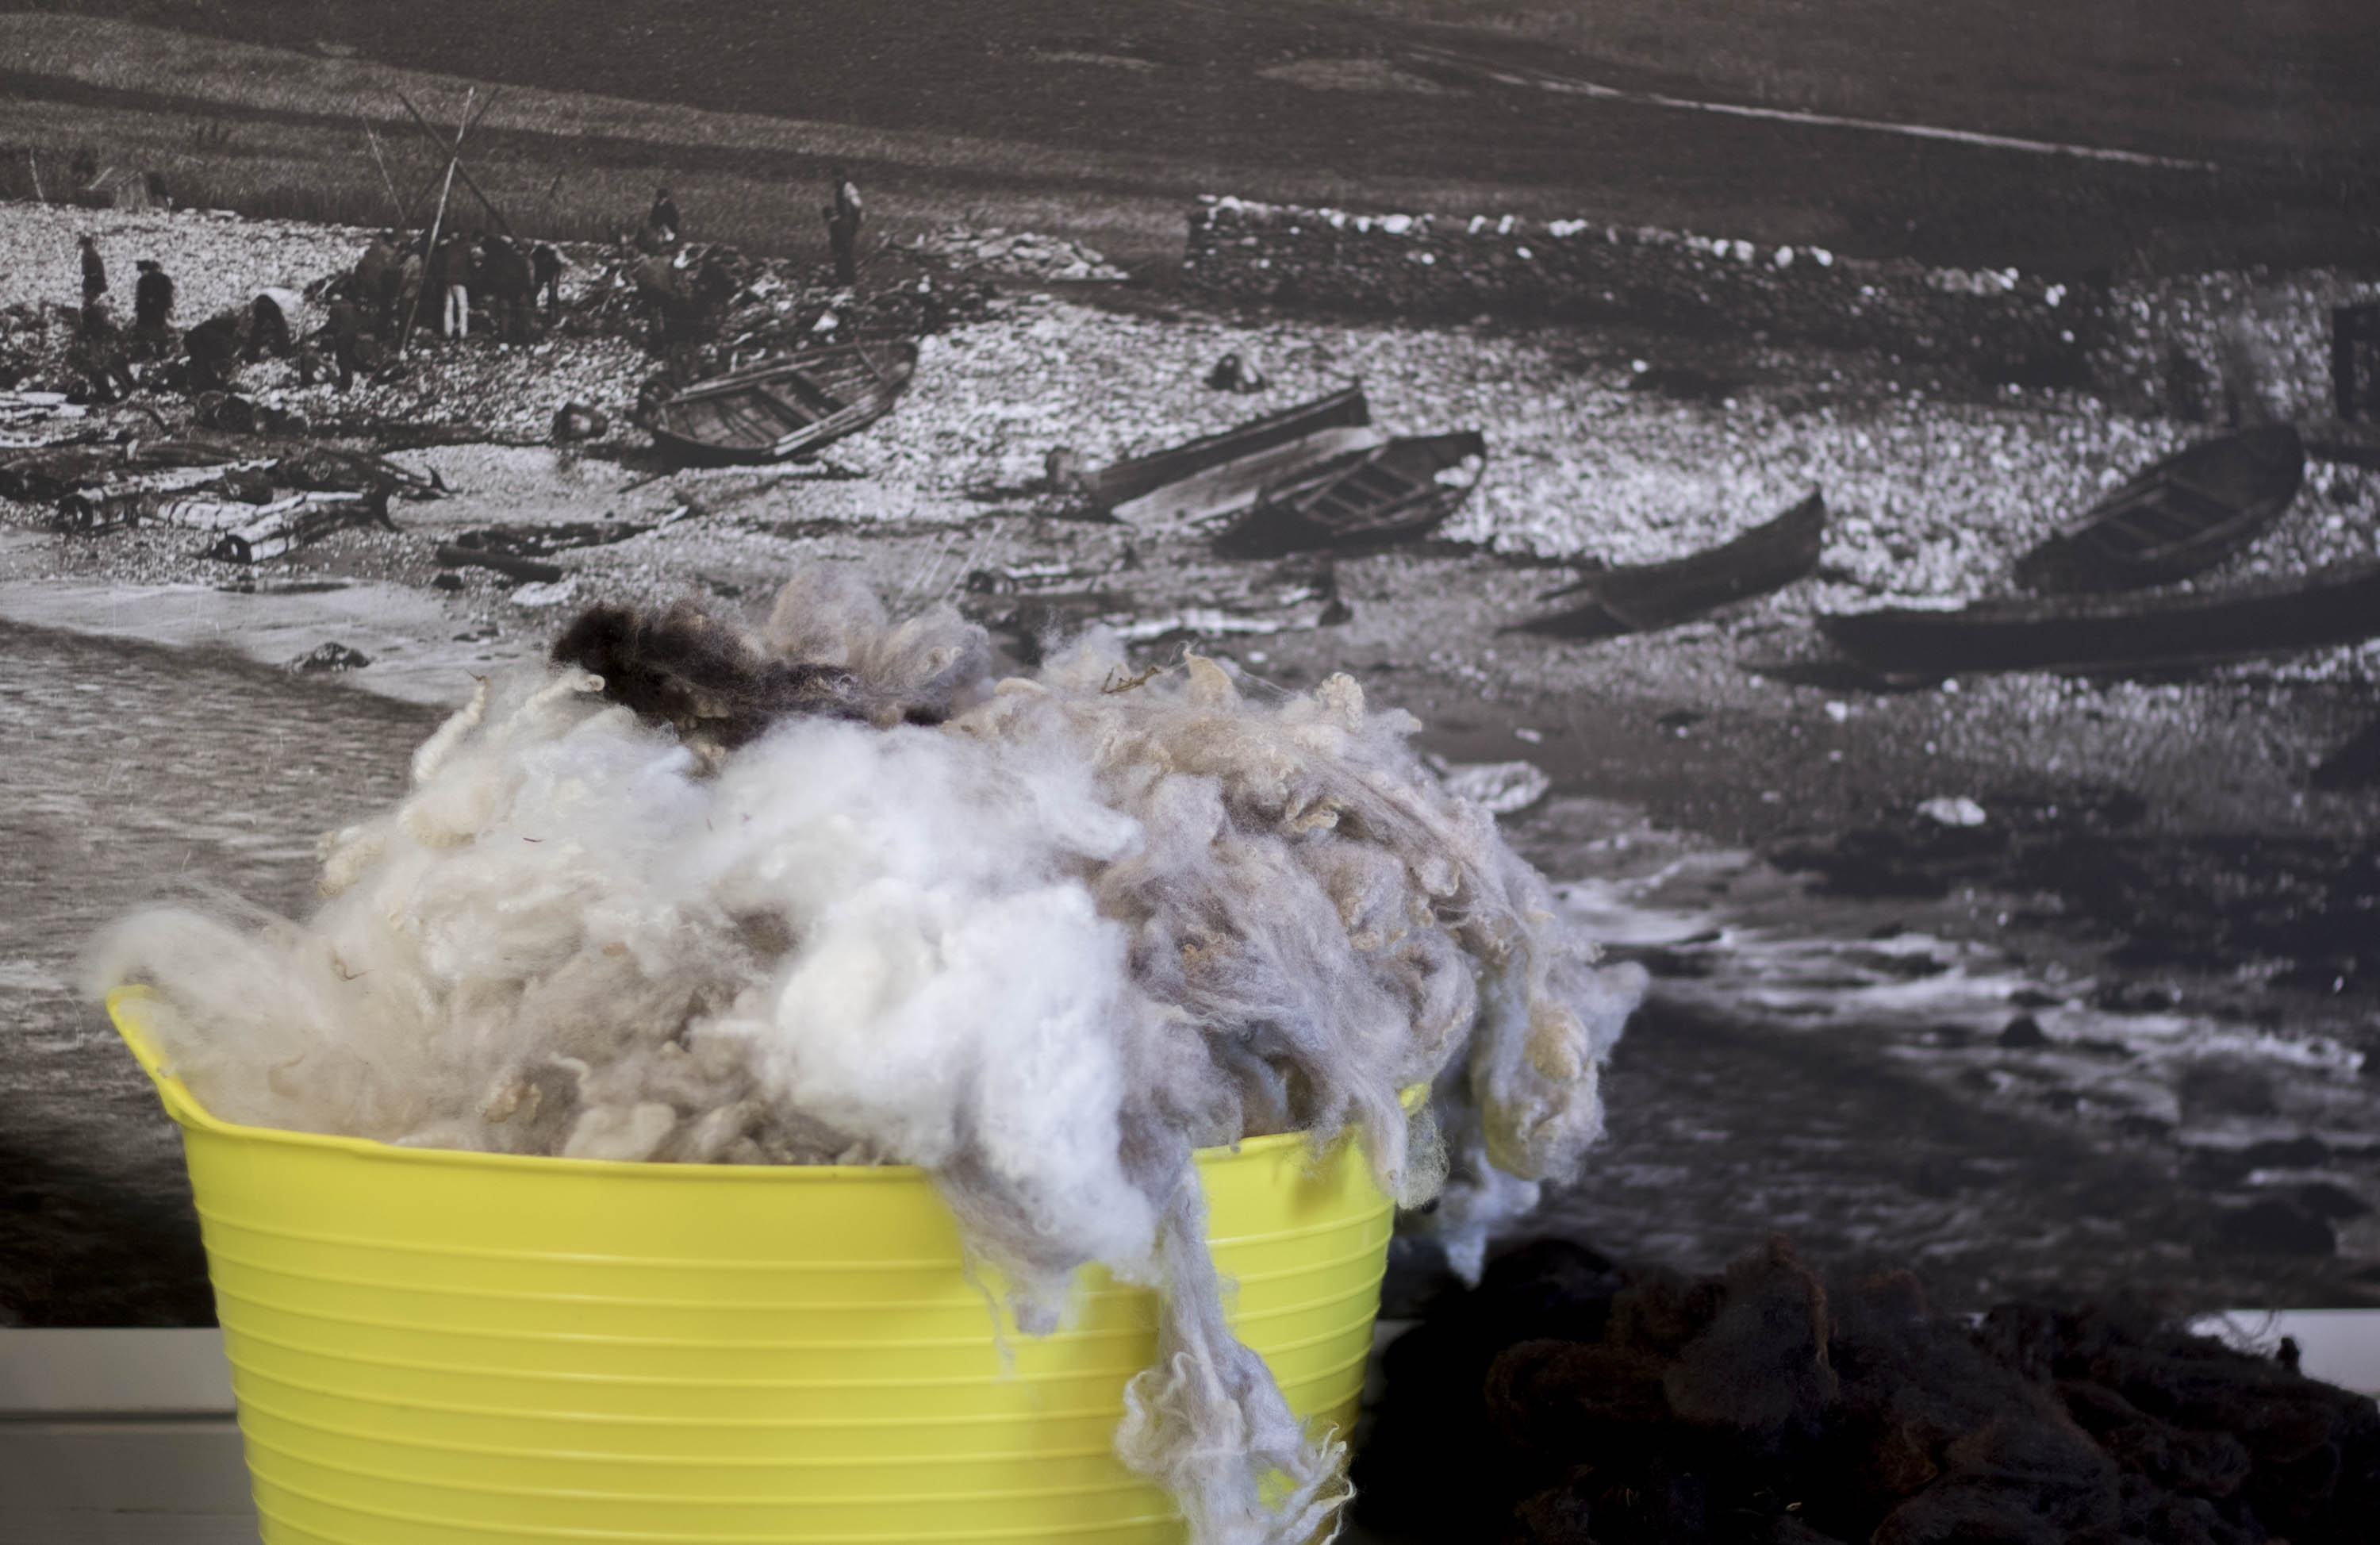 Yellow tub trug full of Shetland, undyed fleece in Hoswick in natural greys. Behind is a display at the Hoswick Visitor Centre with a photograph of the Whale Caa